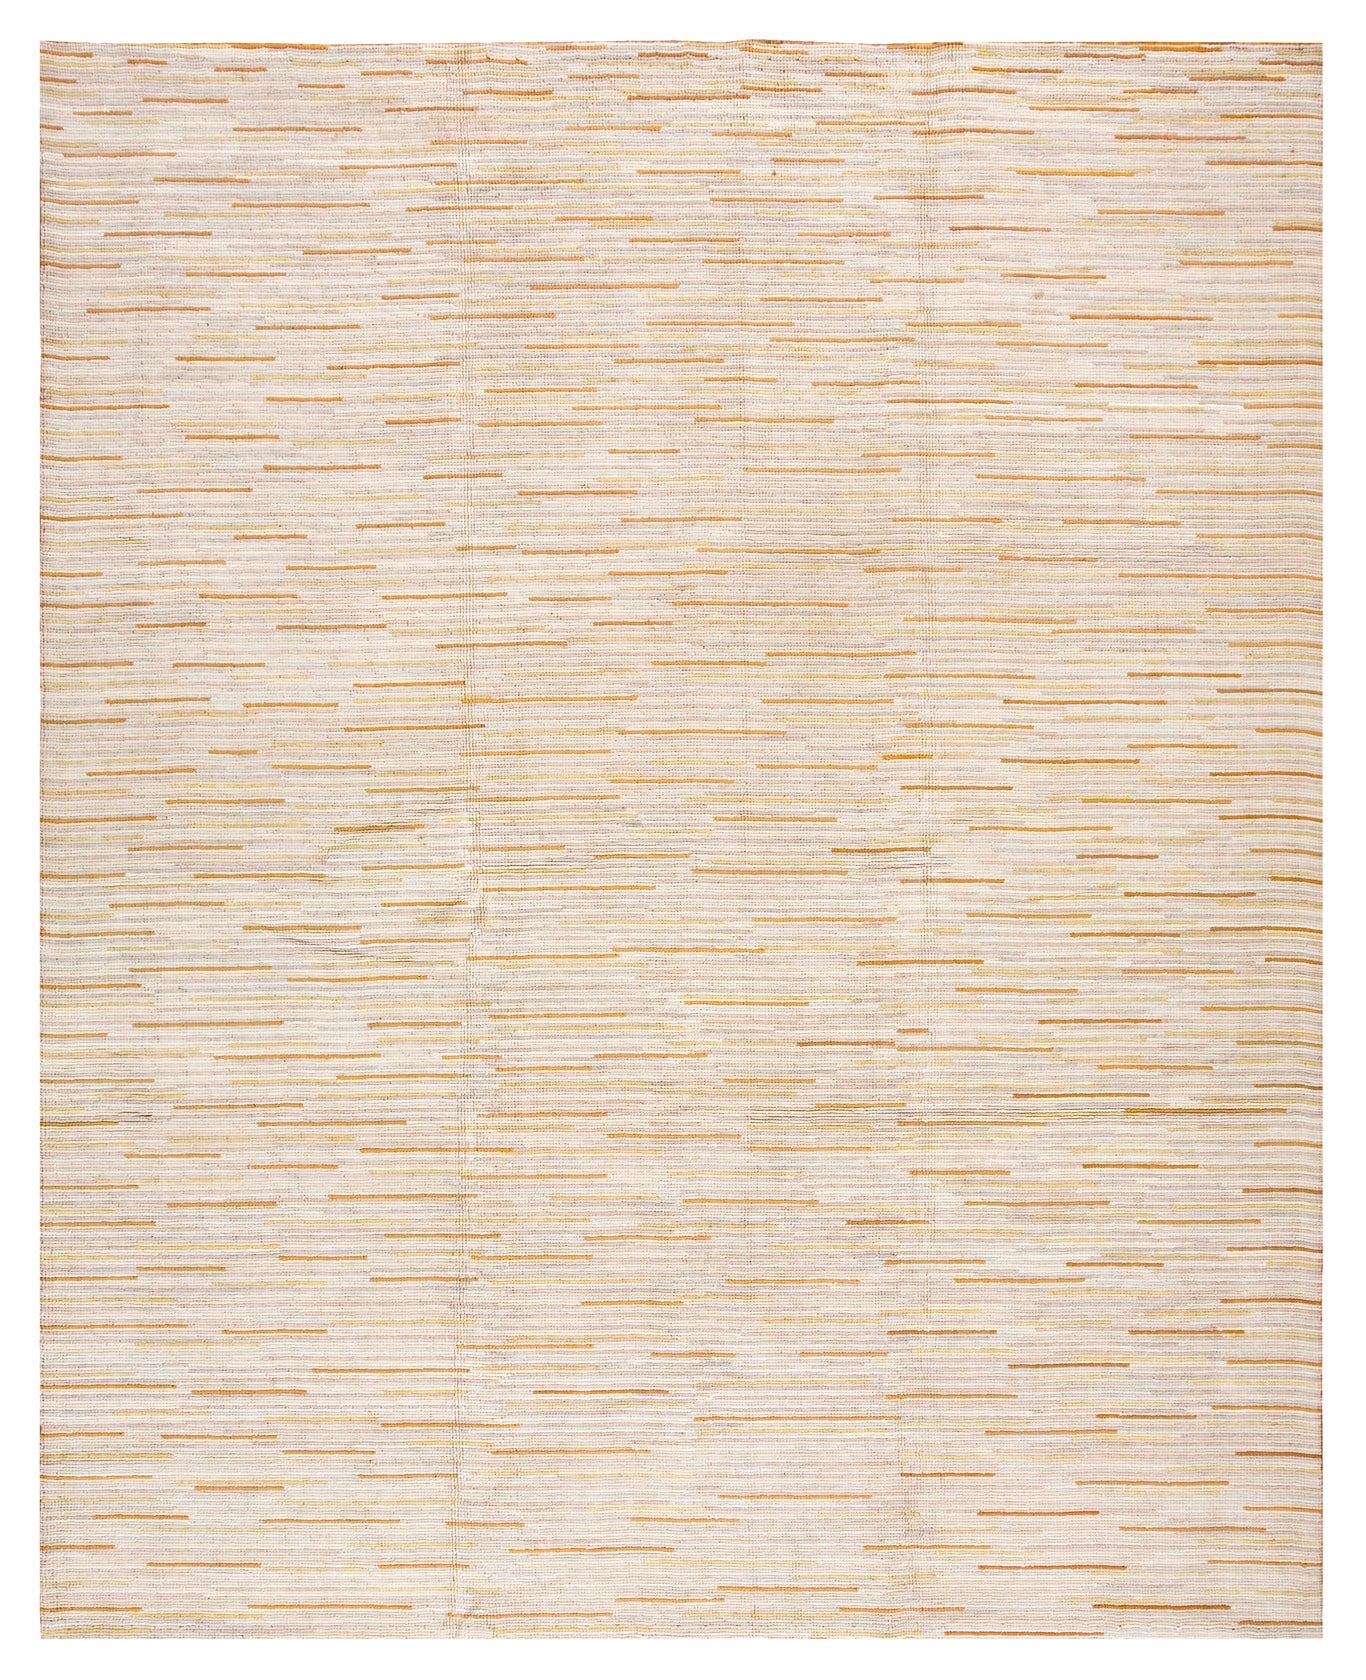 Contemporary American Cotton Hooked Rug 6' 0" x 9' 0" (183 x 274 cm)